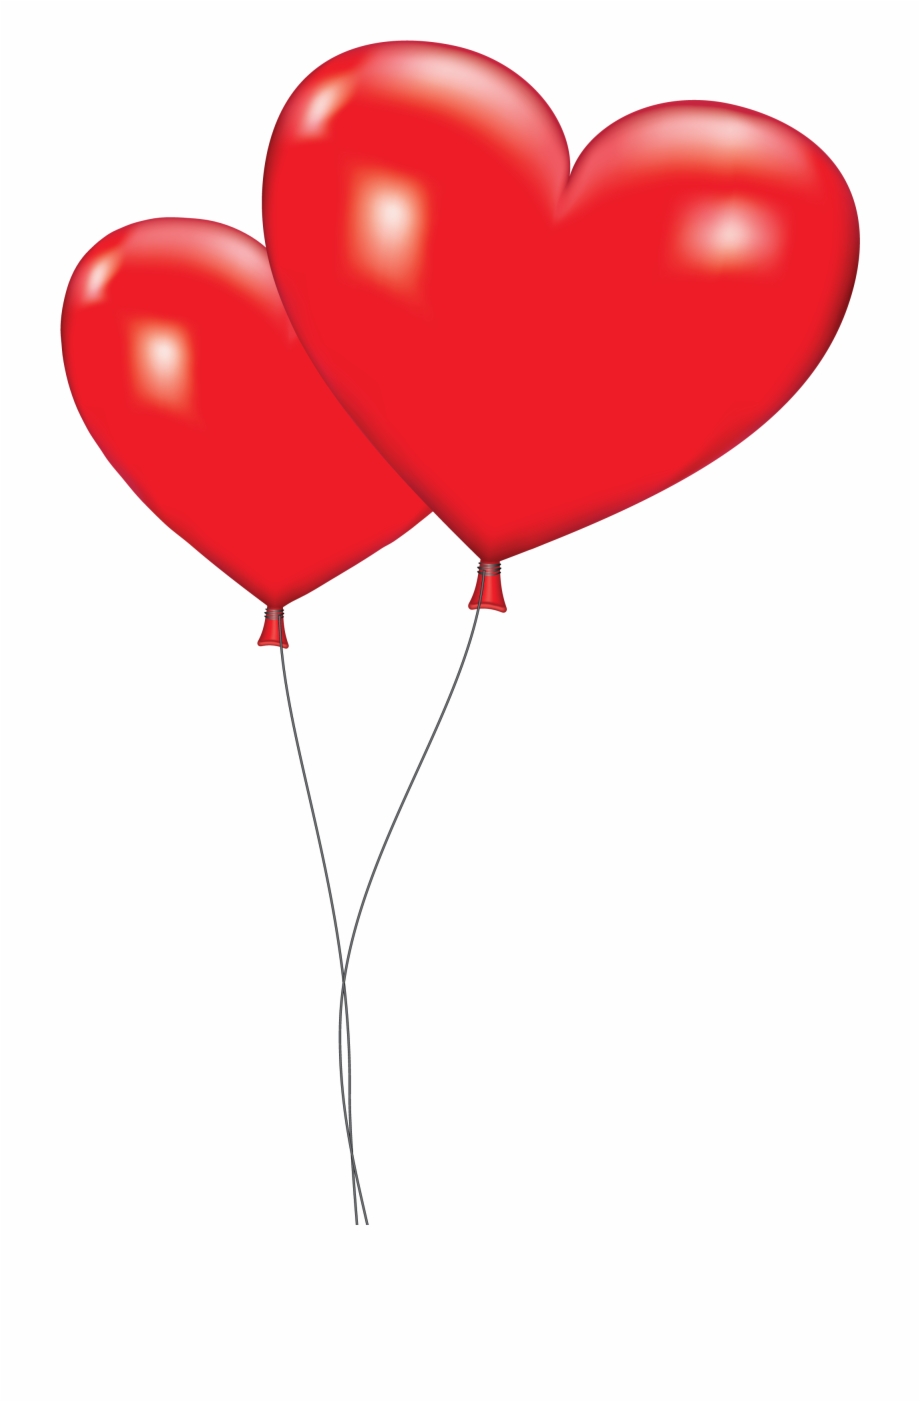 Large Red Heart Balloons Png Clipart Picture.